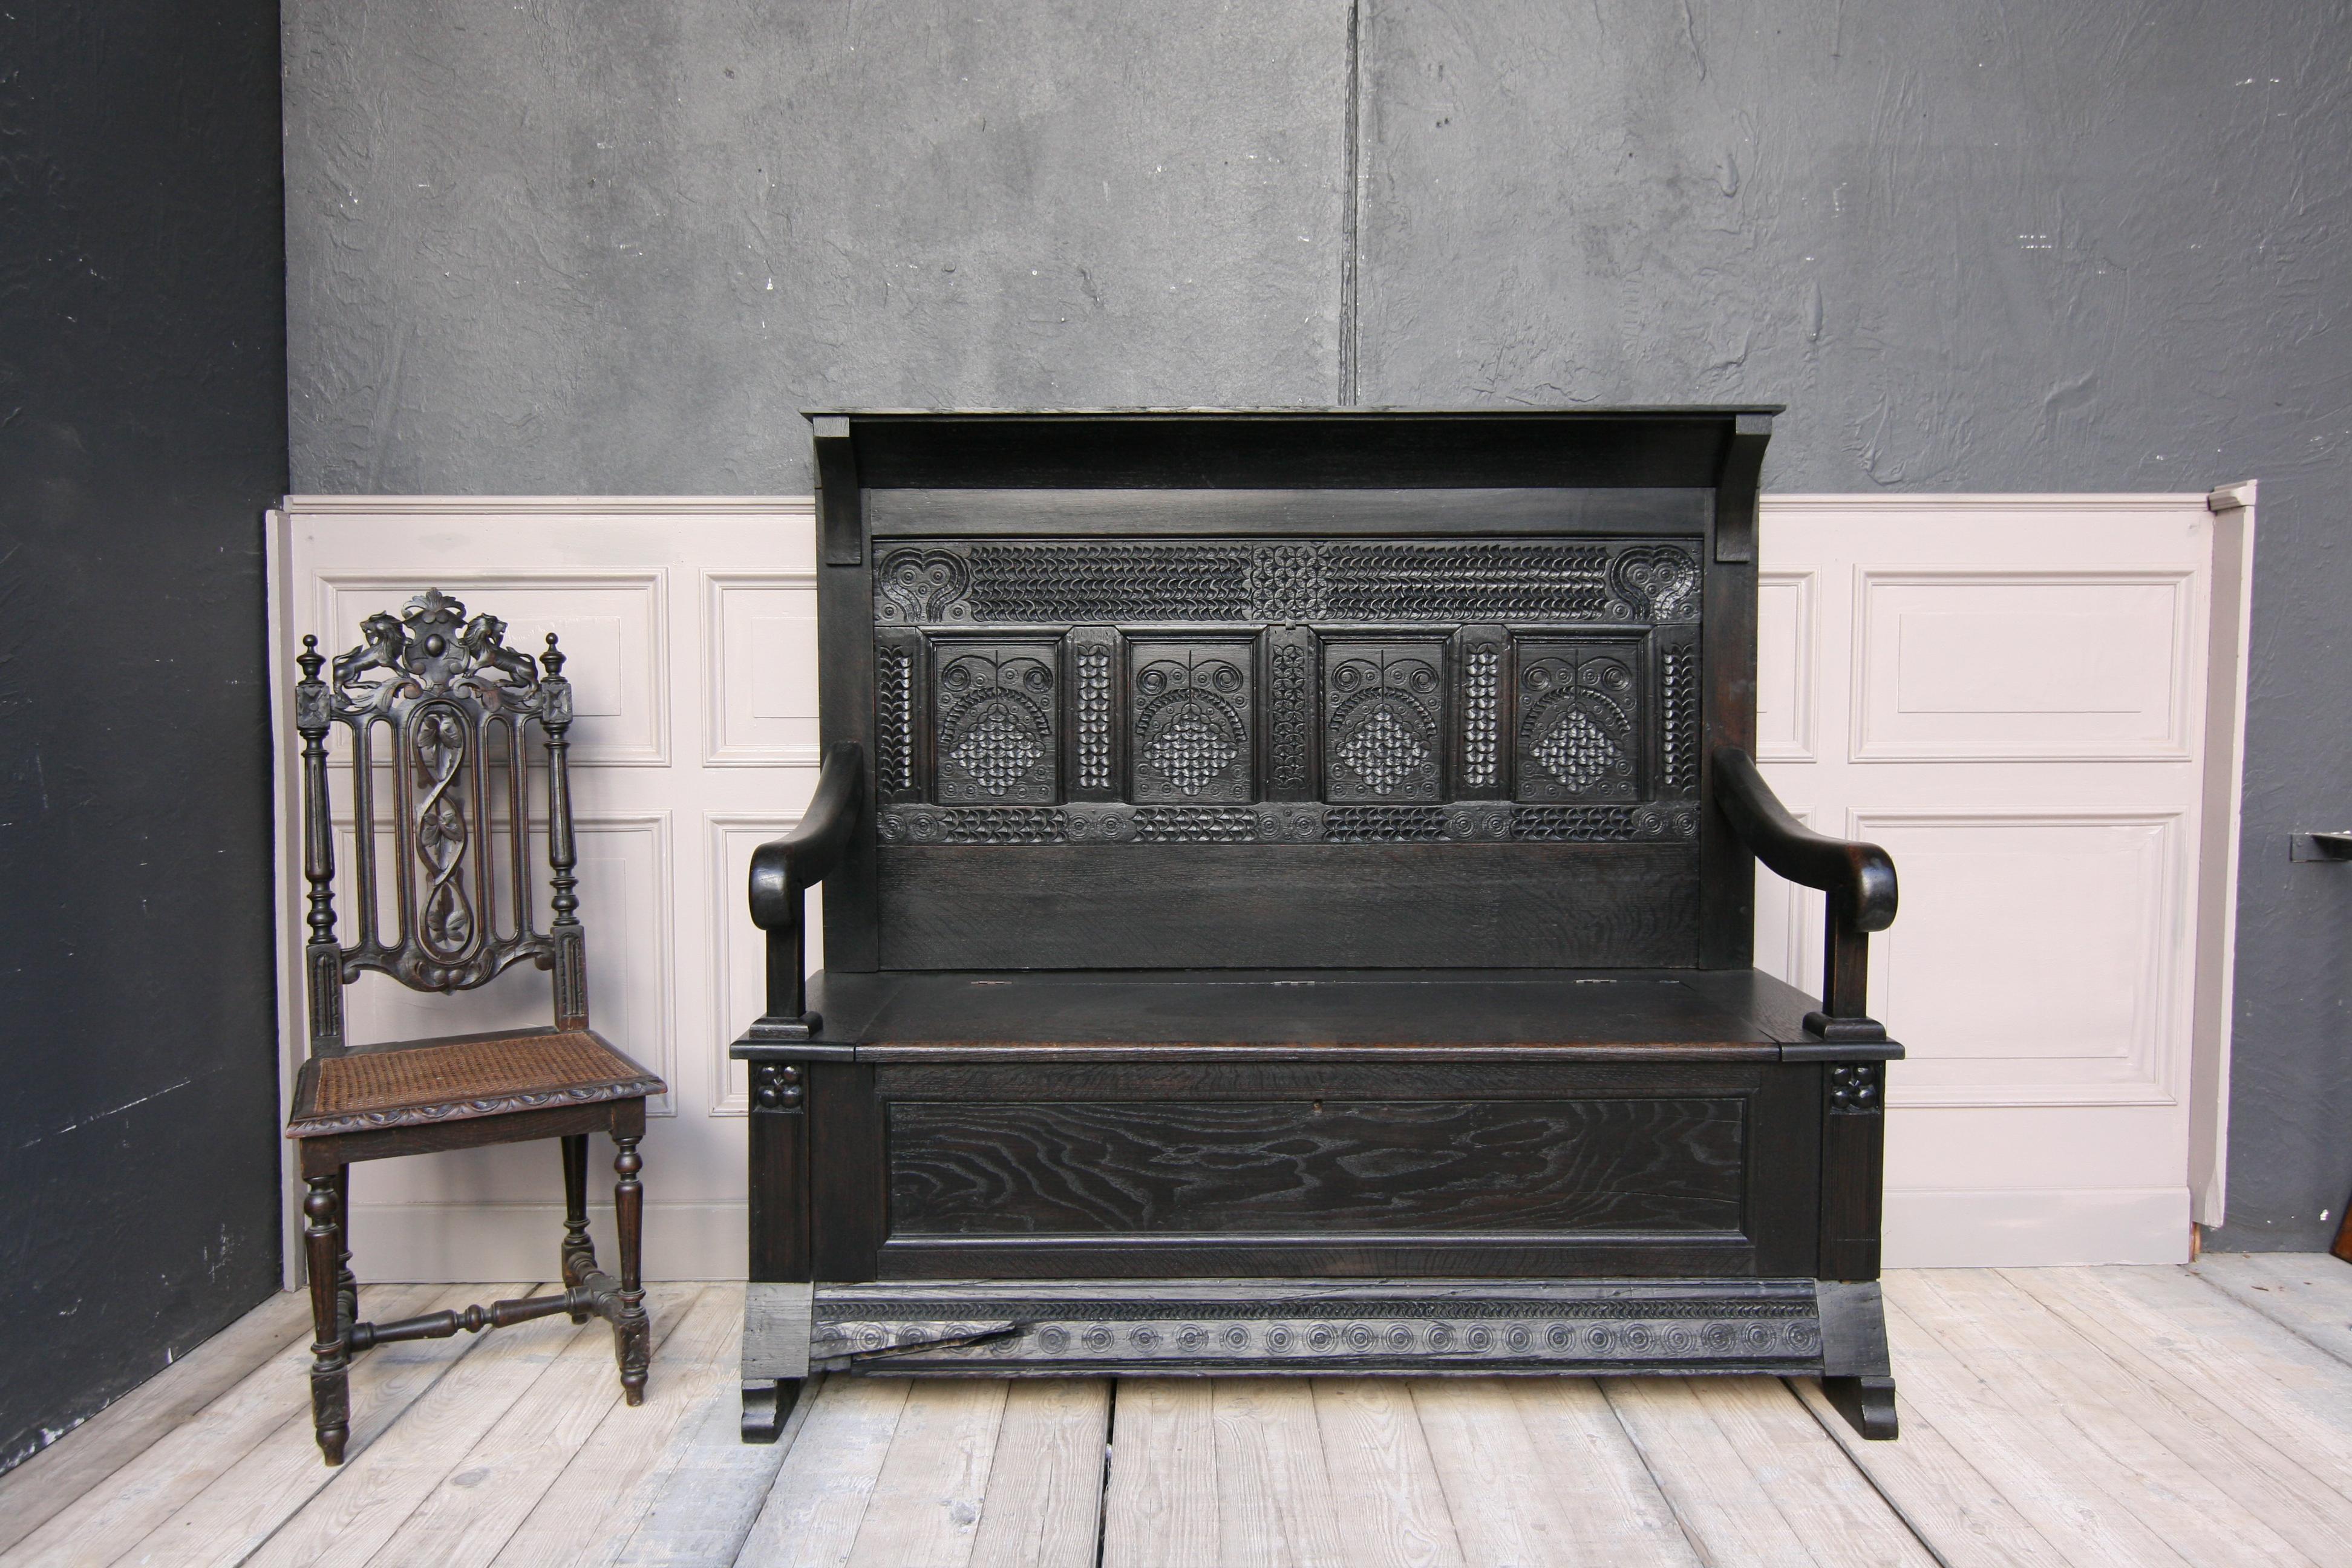 German bench from the 18th century, made of solid oak.

Dimensions: 
141 cm high / 55.51 inch high, 
155 cm wide / 61.02 inch wide, 
56 cm deep / 22.05 inch deep,
Seat height: 52 cm / 20.47 inch.